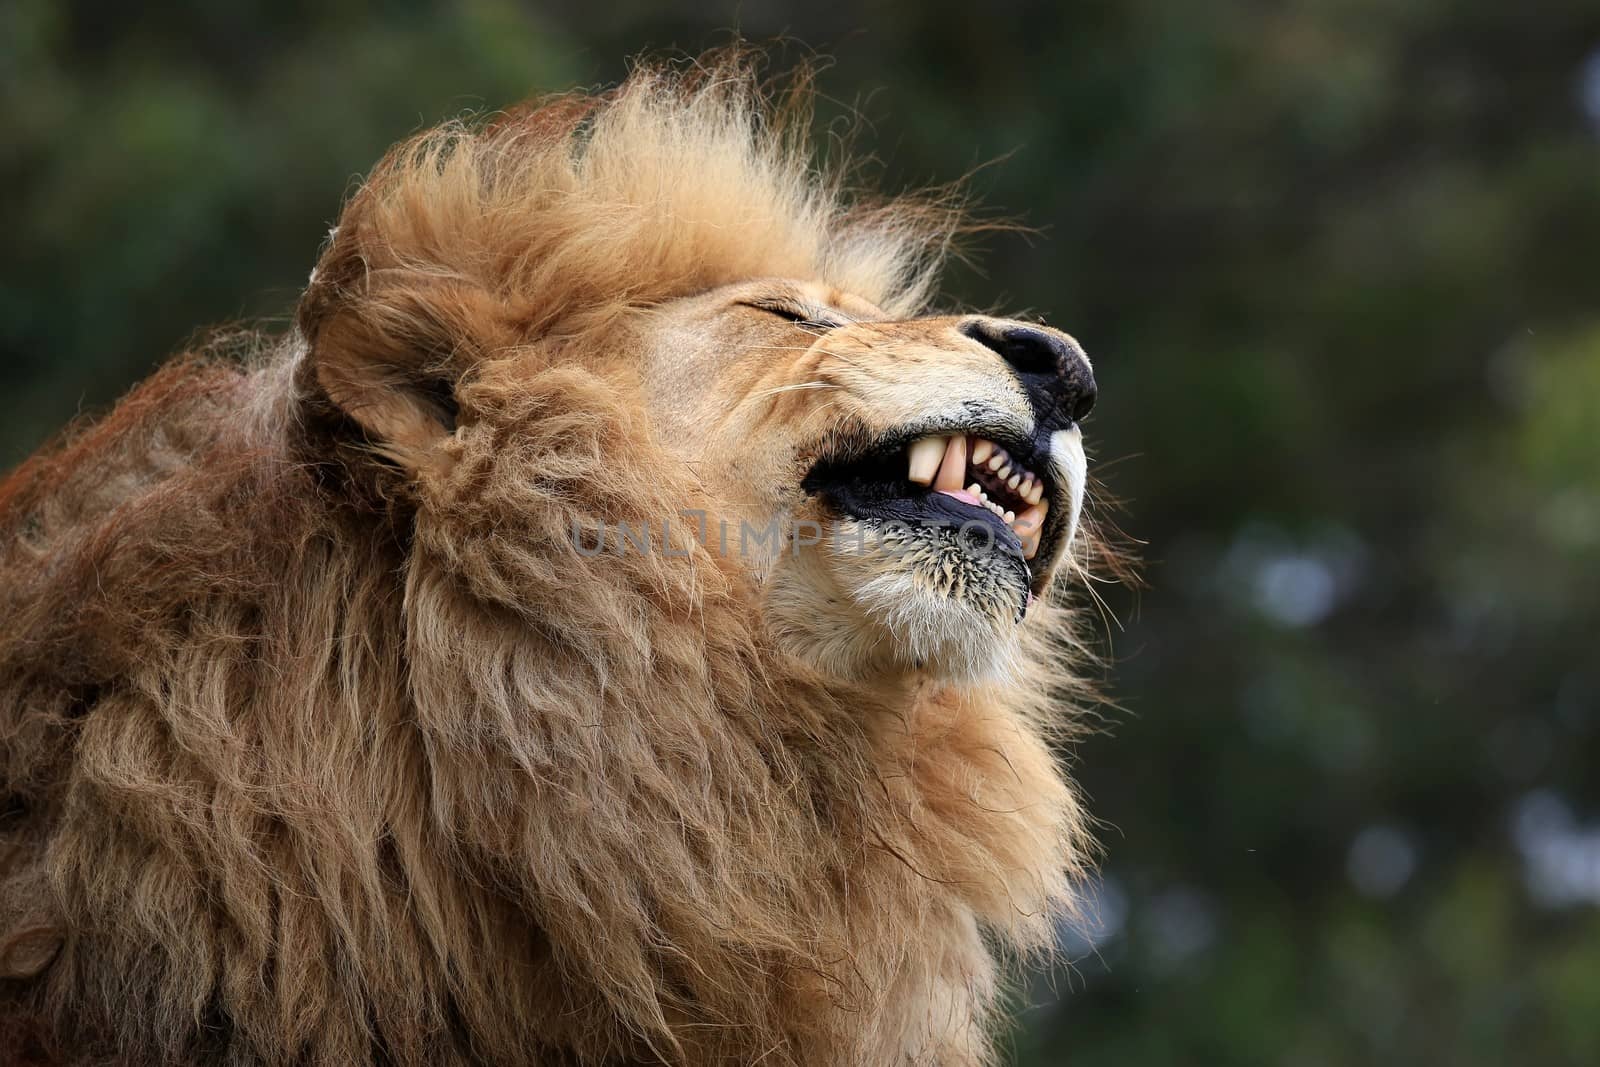 Huge male lion with big mane grimacing and showing it's teeth